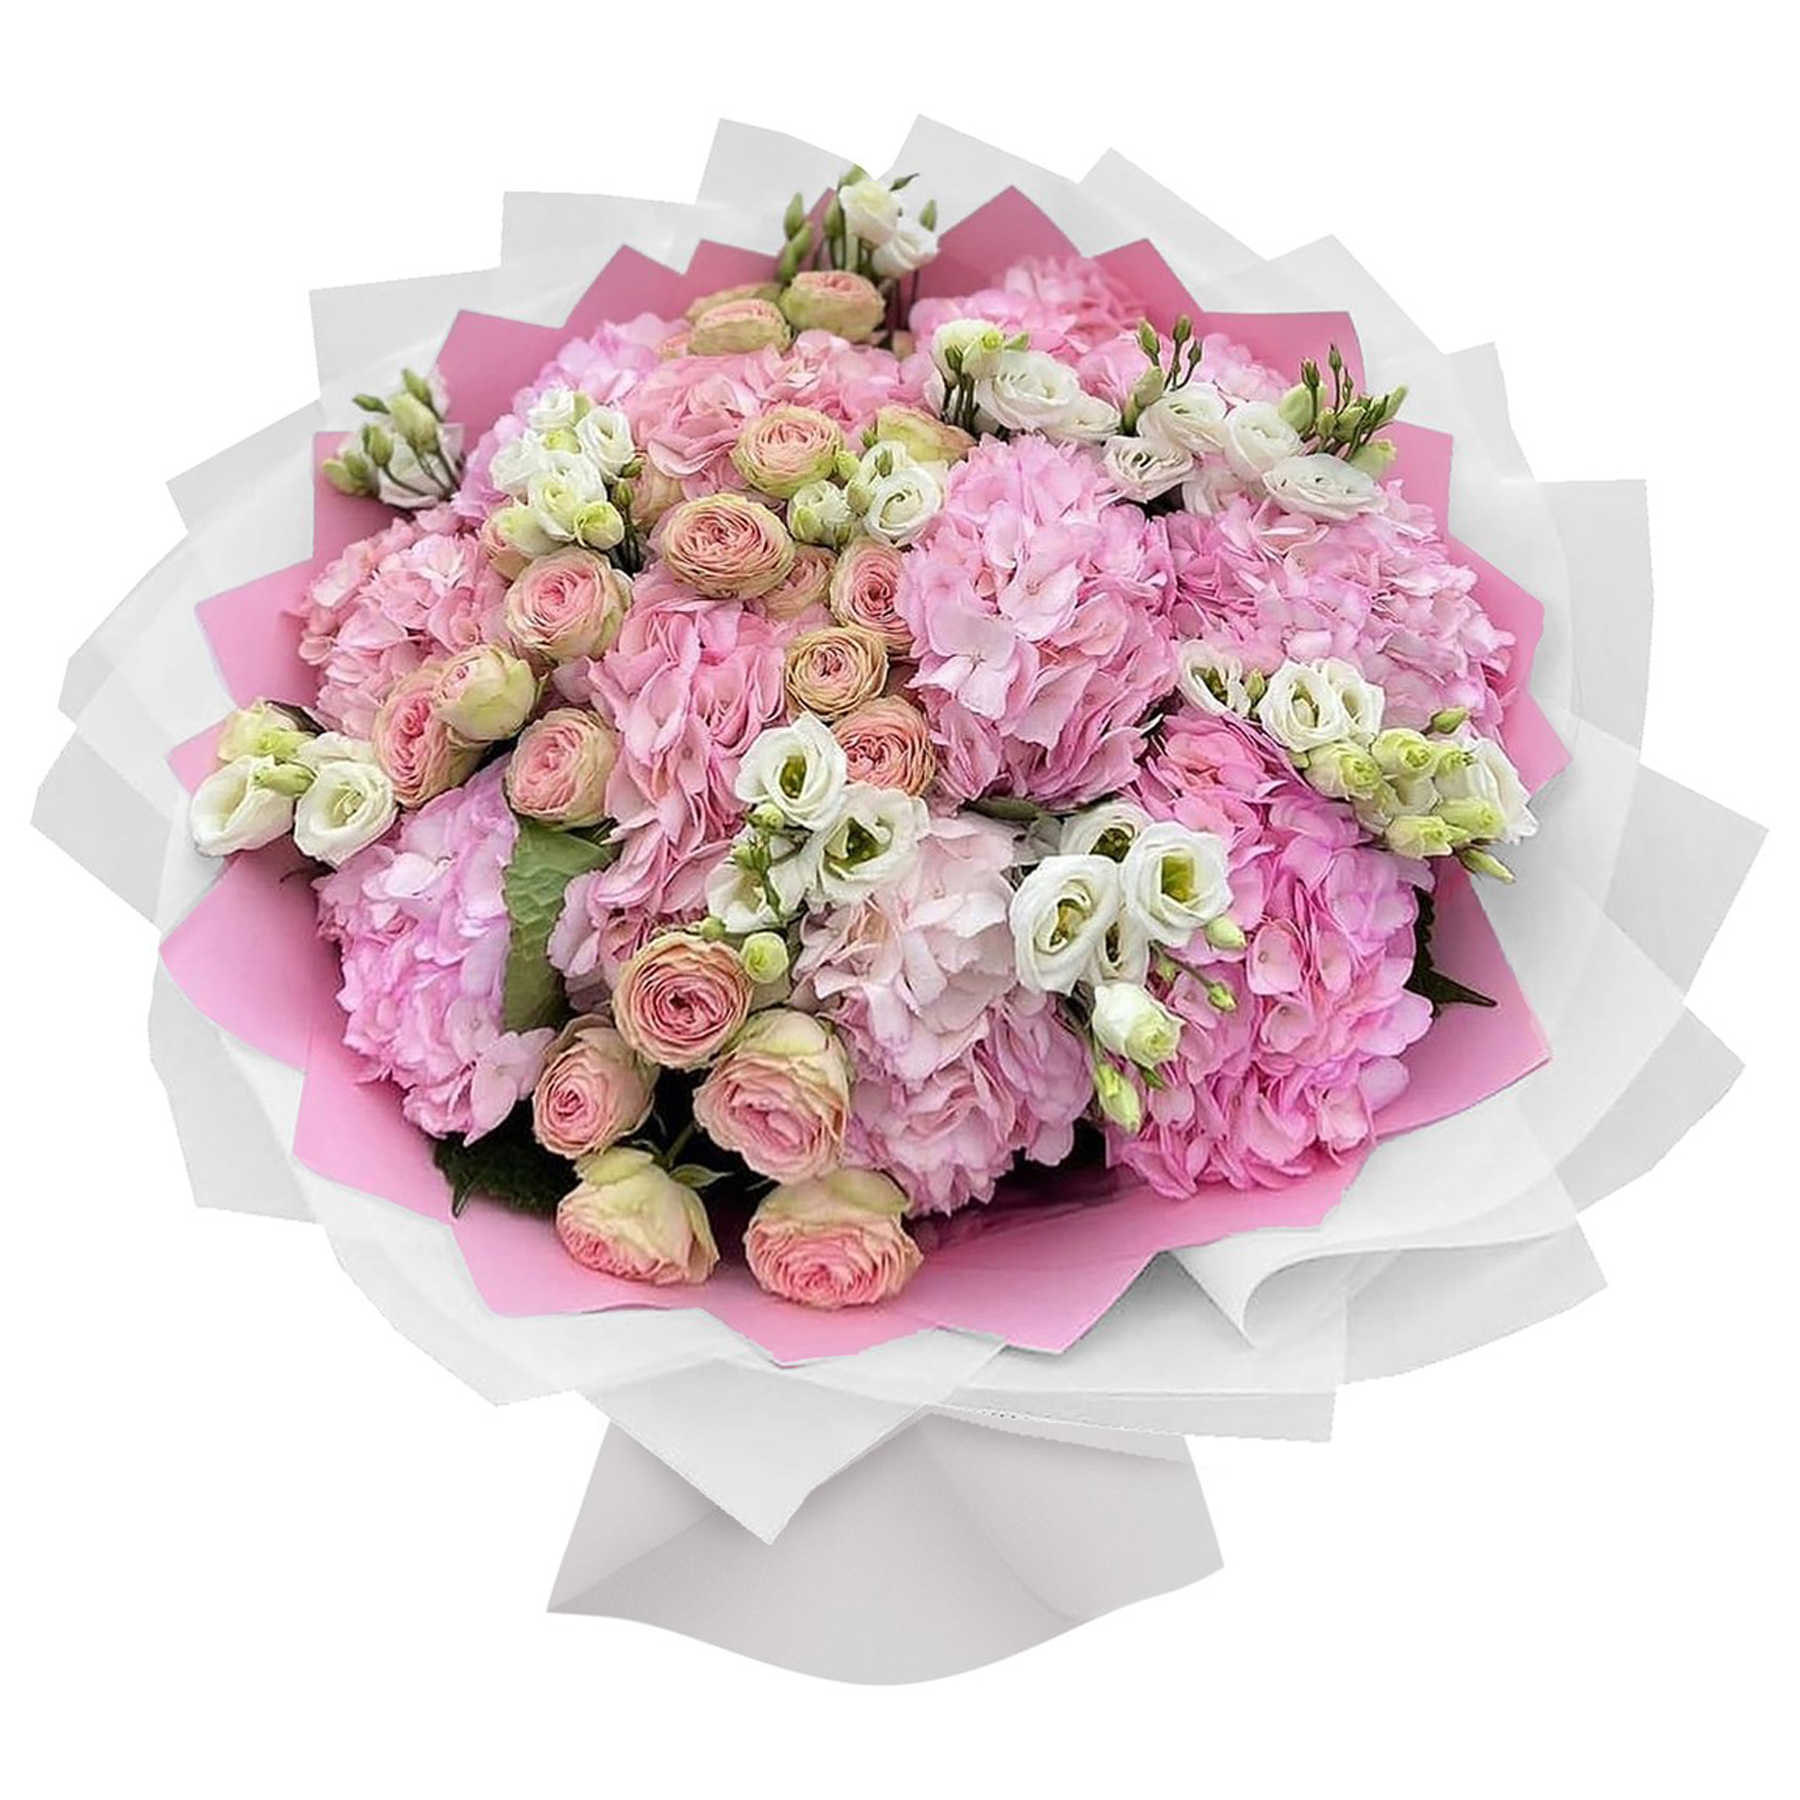 pink hydrangea 15 with white astoma 20 with roses double pink